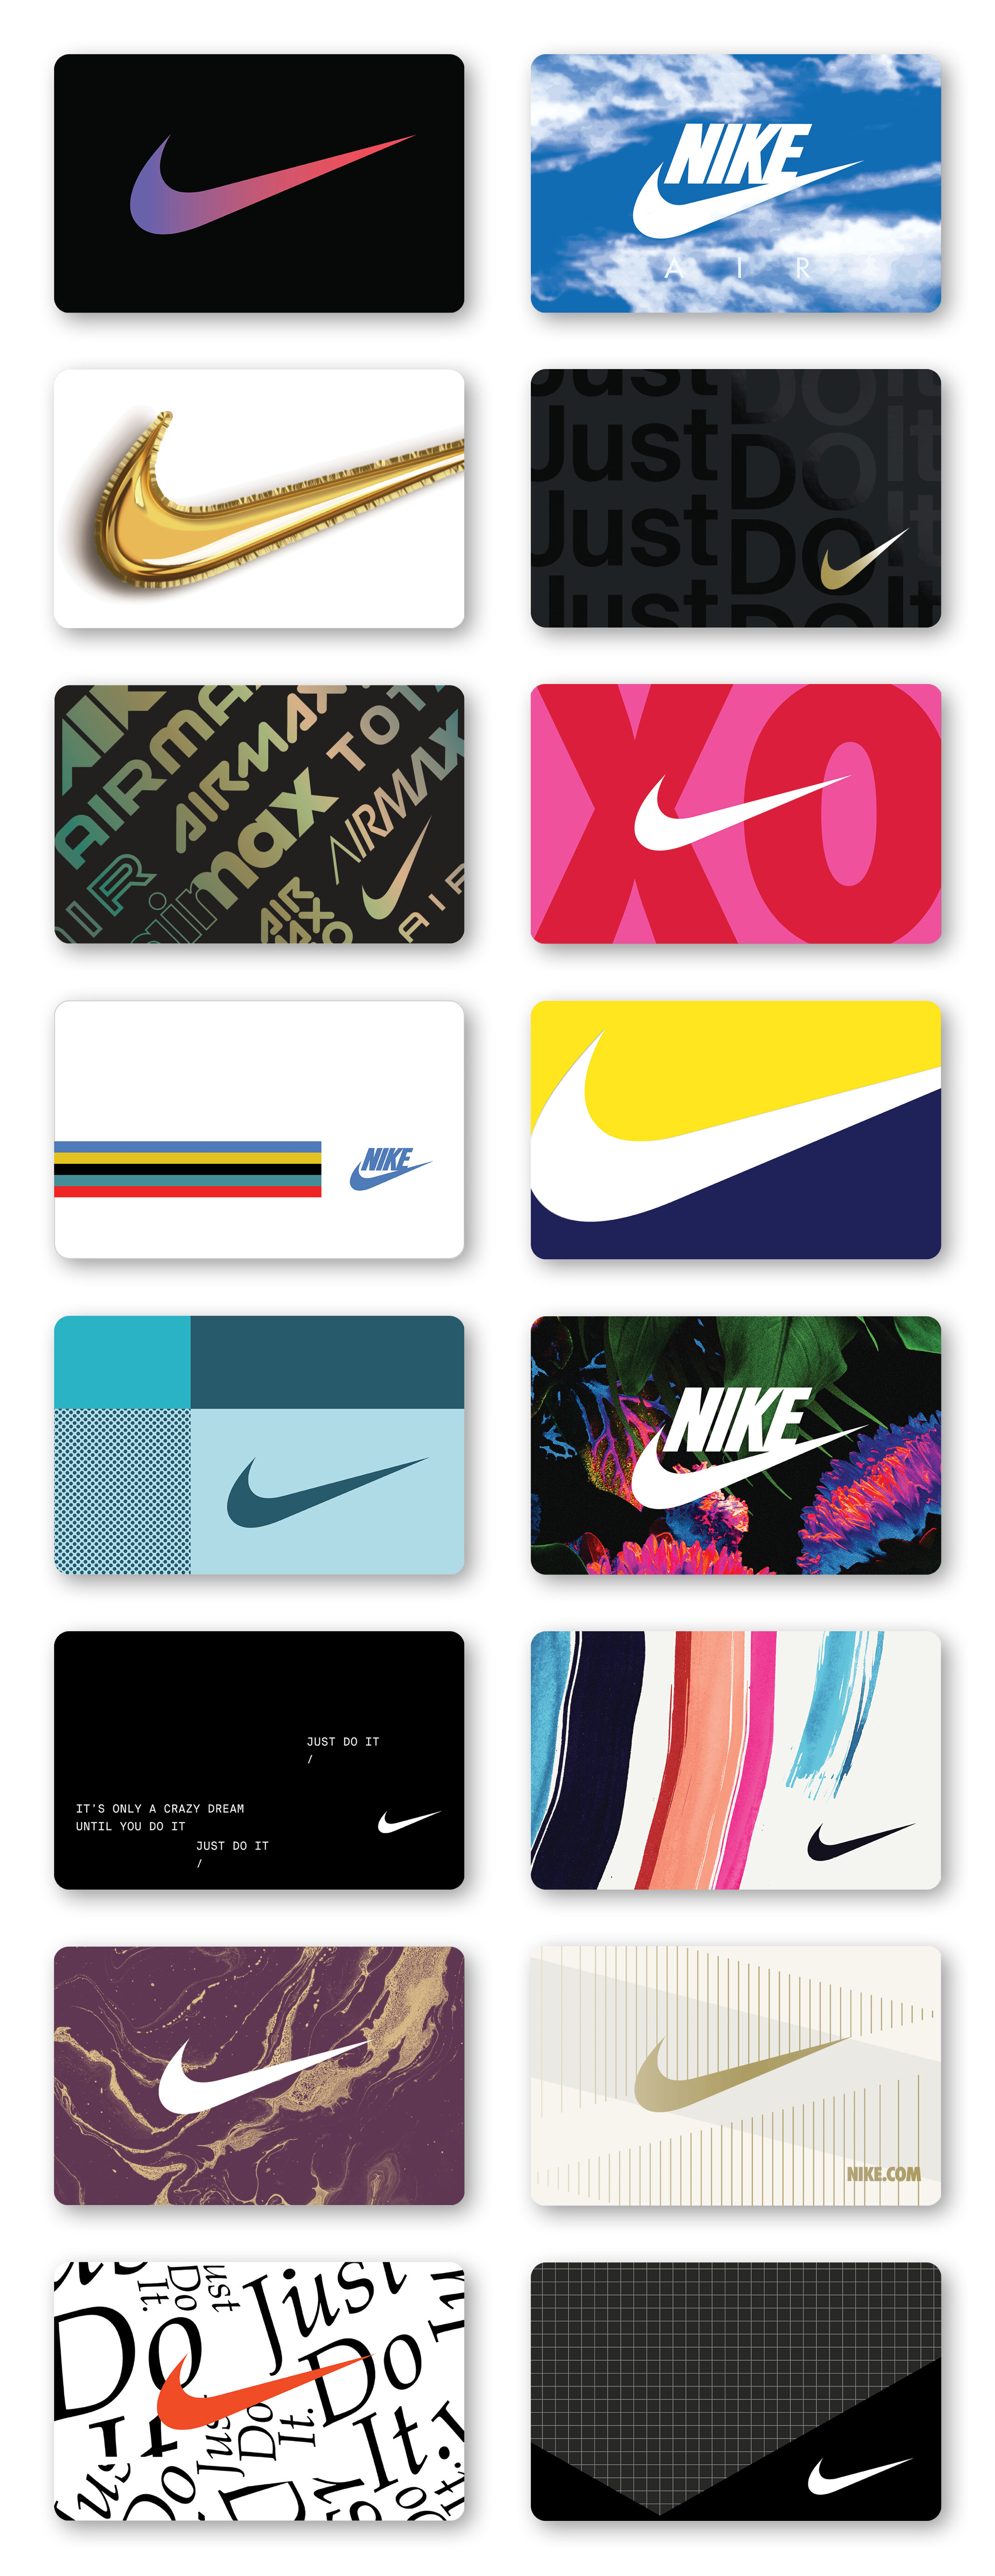 who takes nike gift cards